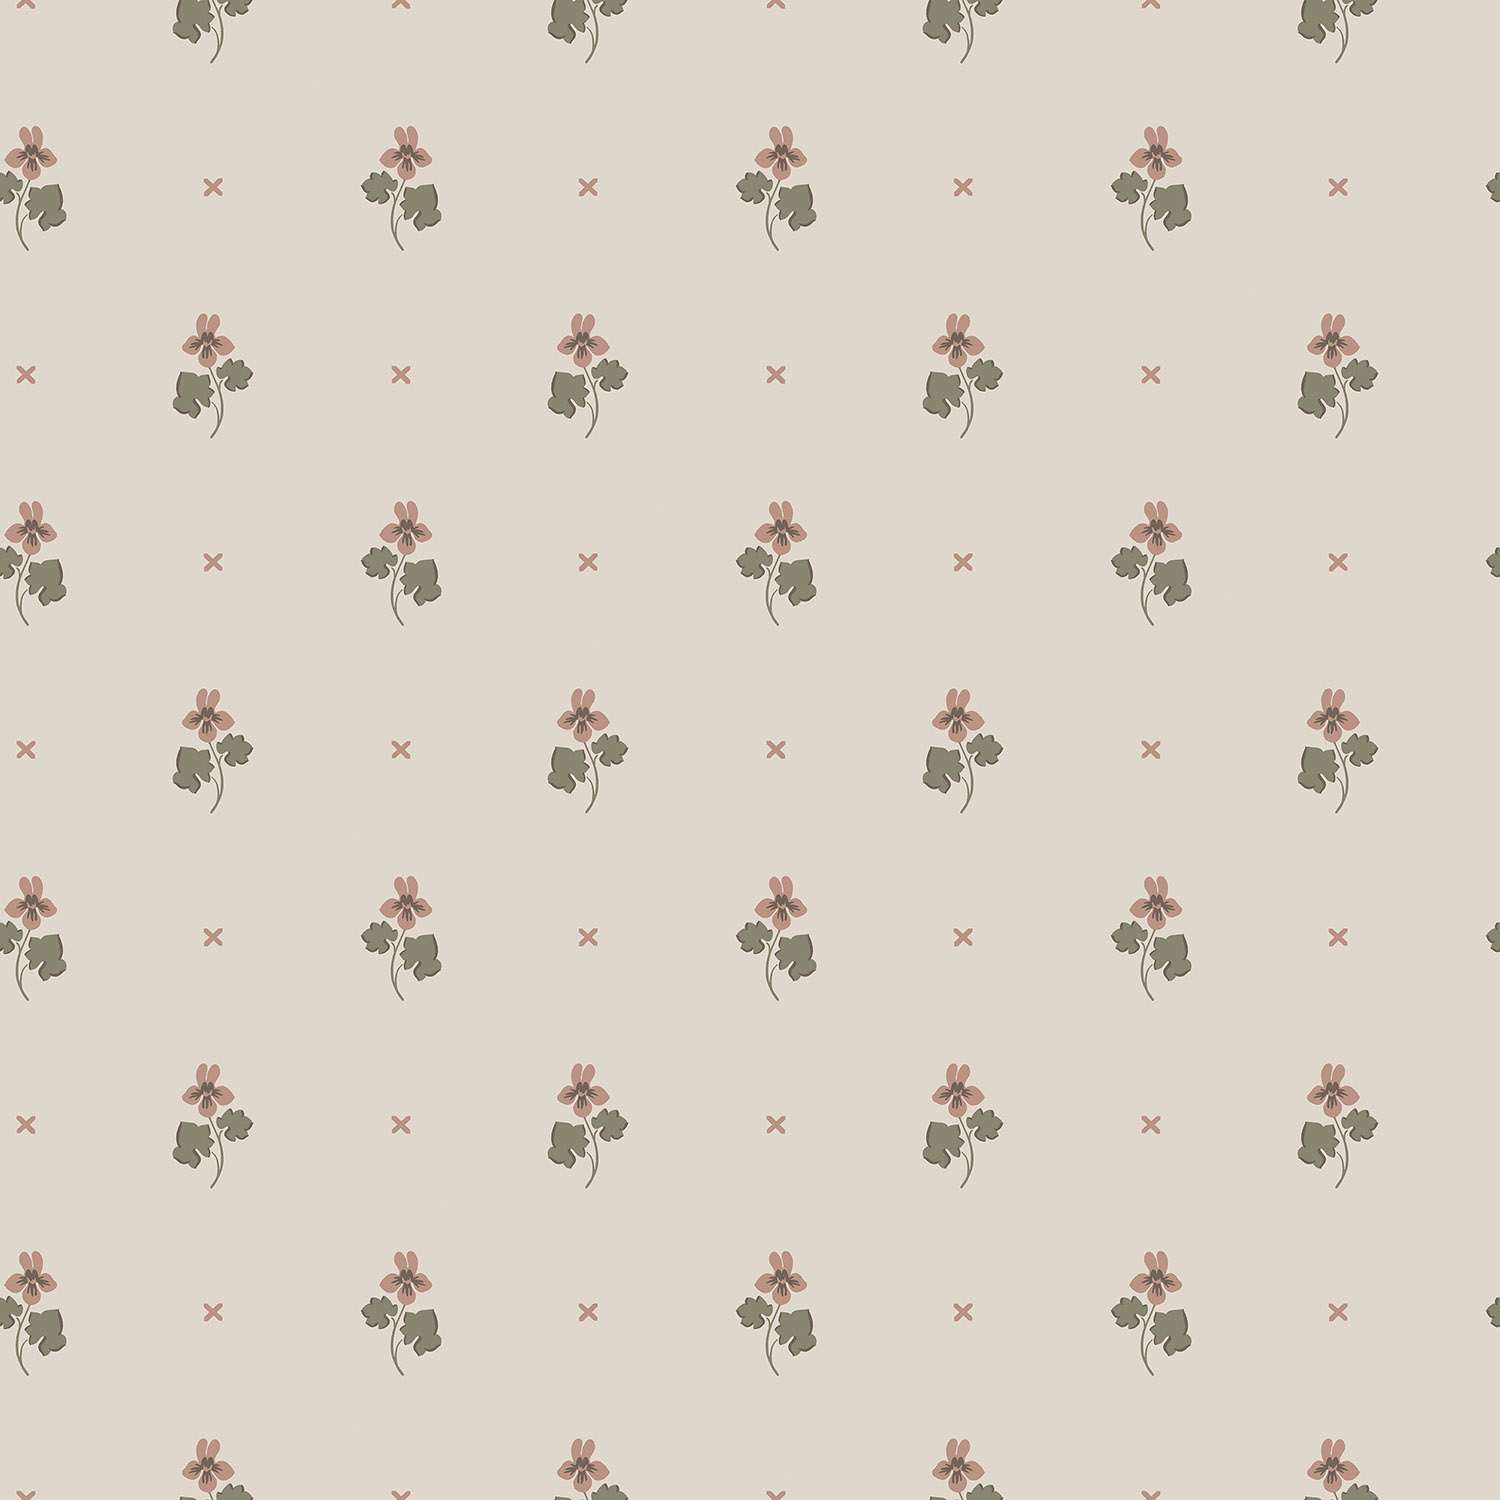 images/productimages/small/s10268-mimi-blush-sandberg-wallpaper-product.jpg